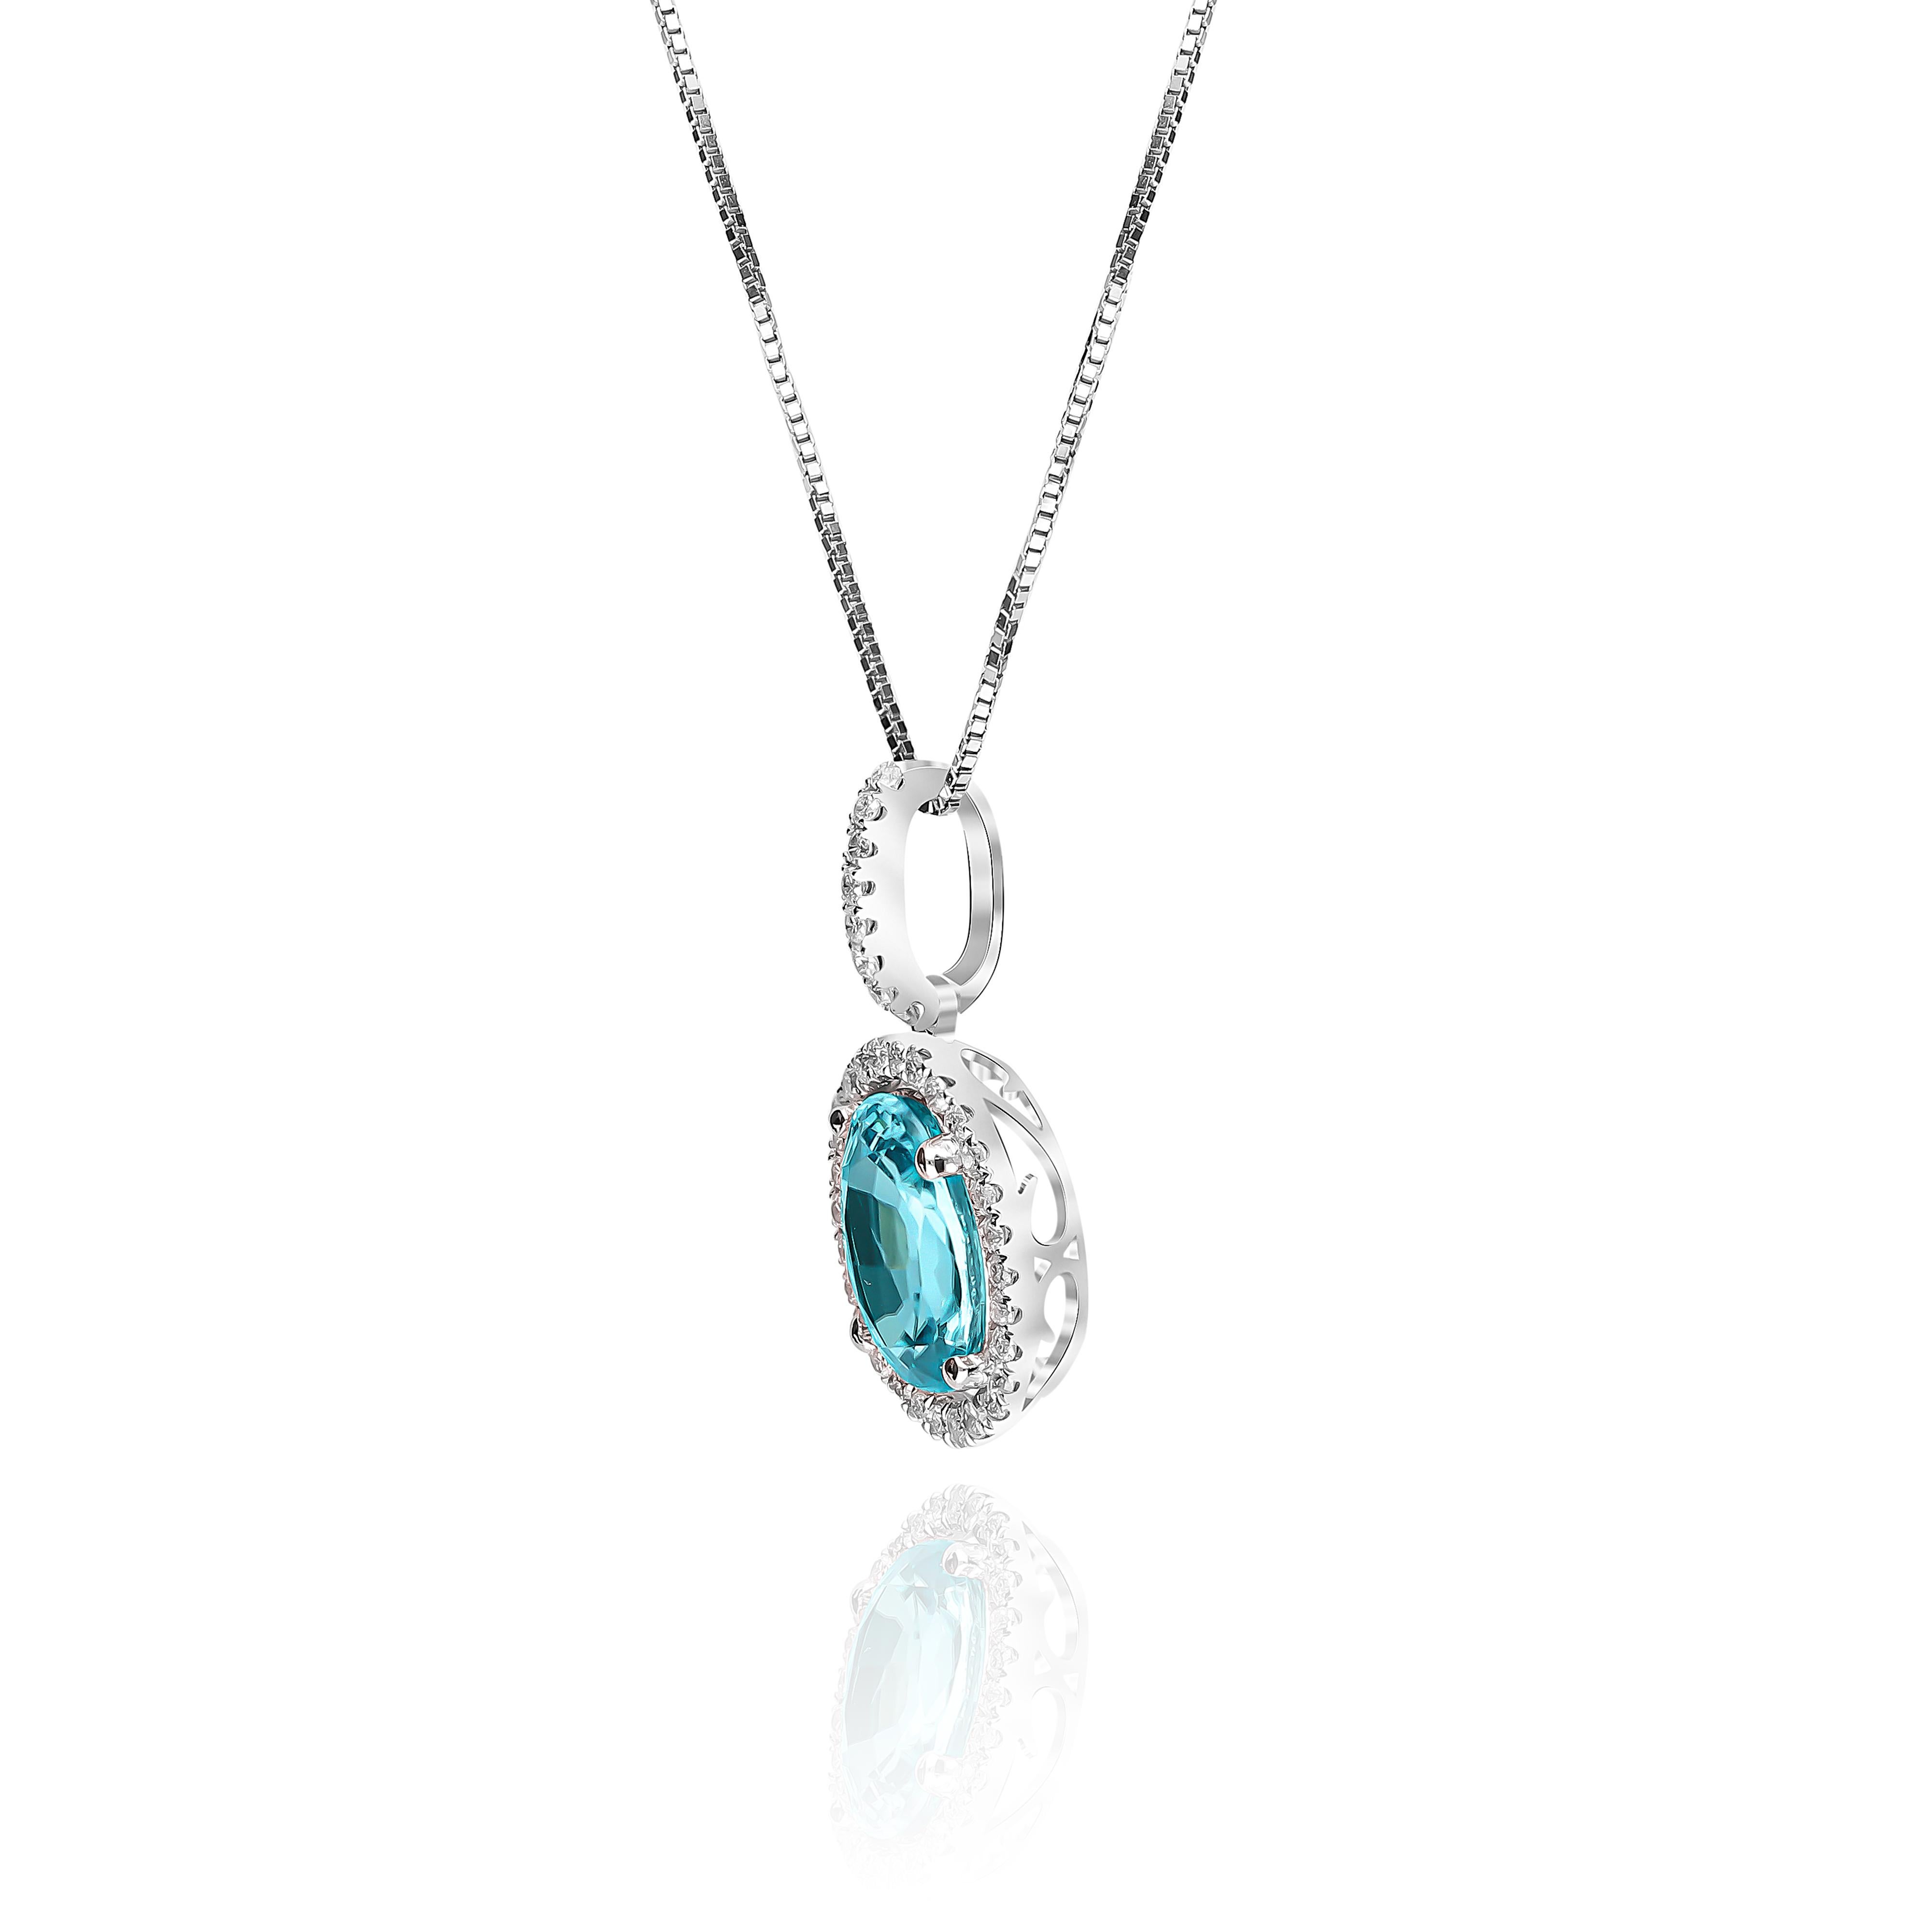 Stunning, timeless and classy eternity Unique Pendant. Decorate yourself in luxury with this Gin & Grace Pendant. This Pendant is made up of Oval-Cut Prong Setting Blue Zircon (1 pcs) 2.60 Carat and Round-Cut Prong Setting Diamond (36 pcs) 0.18